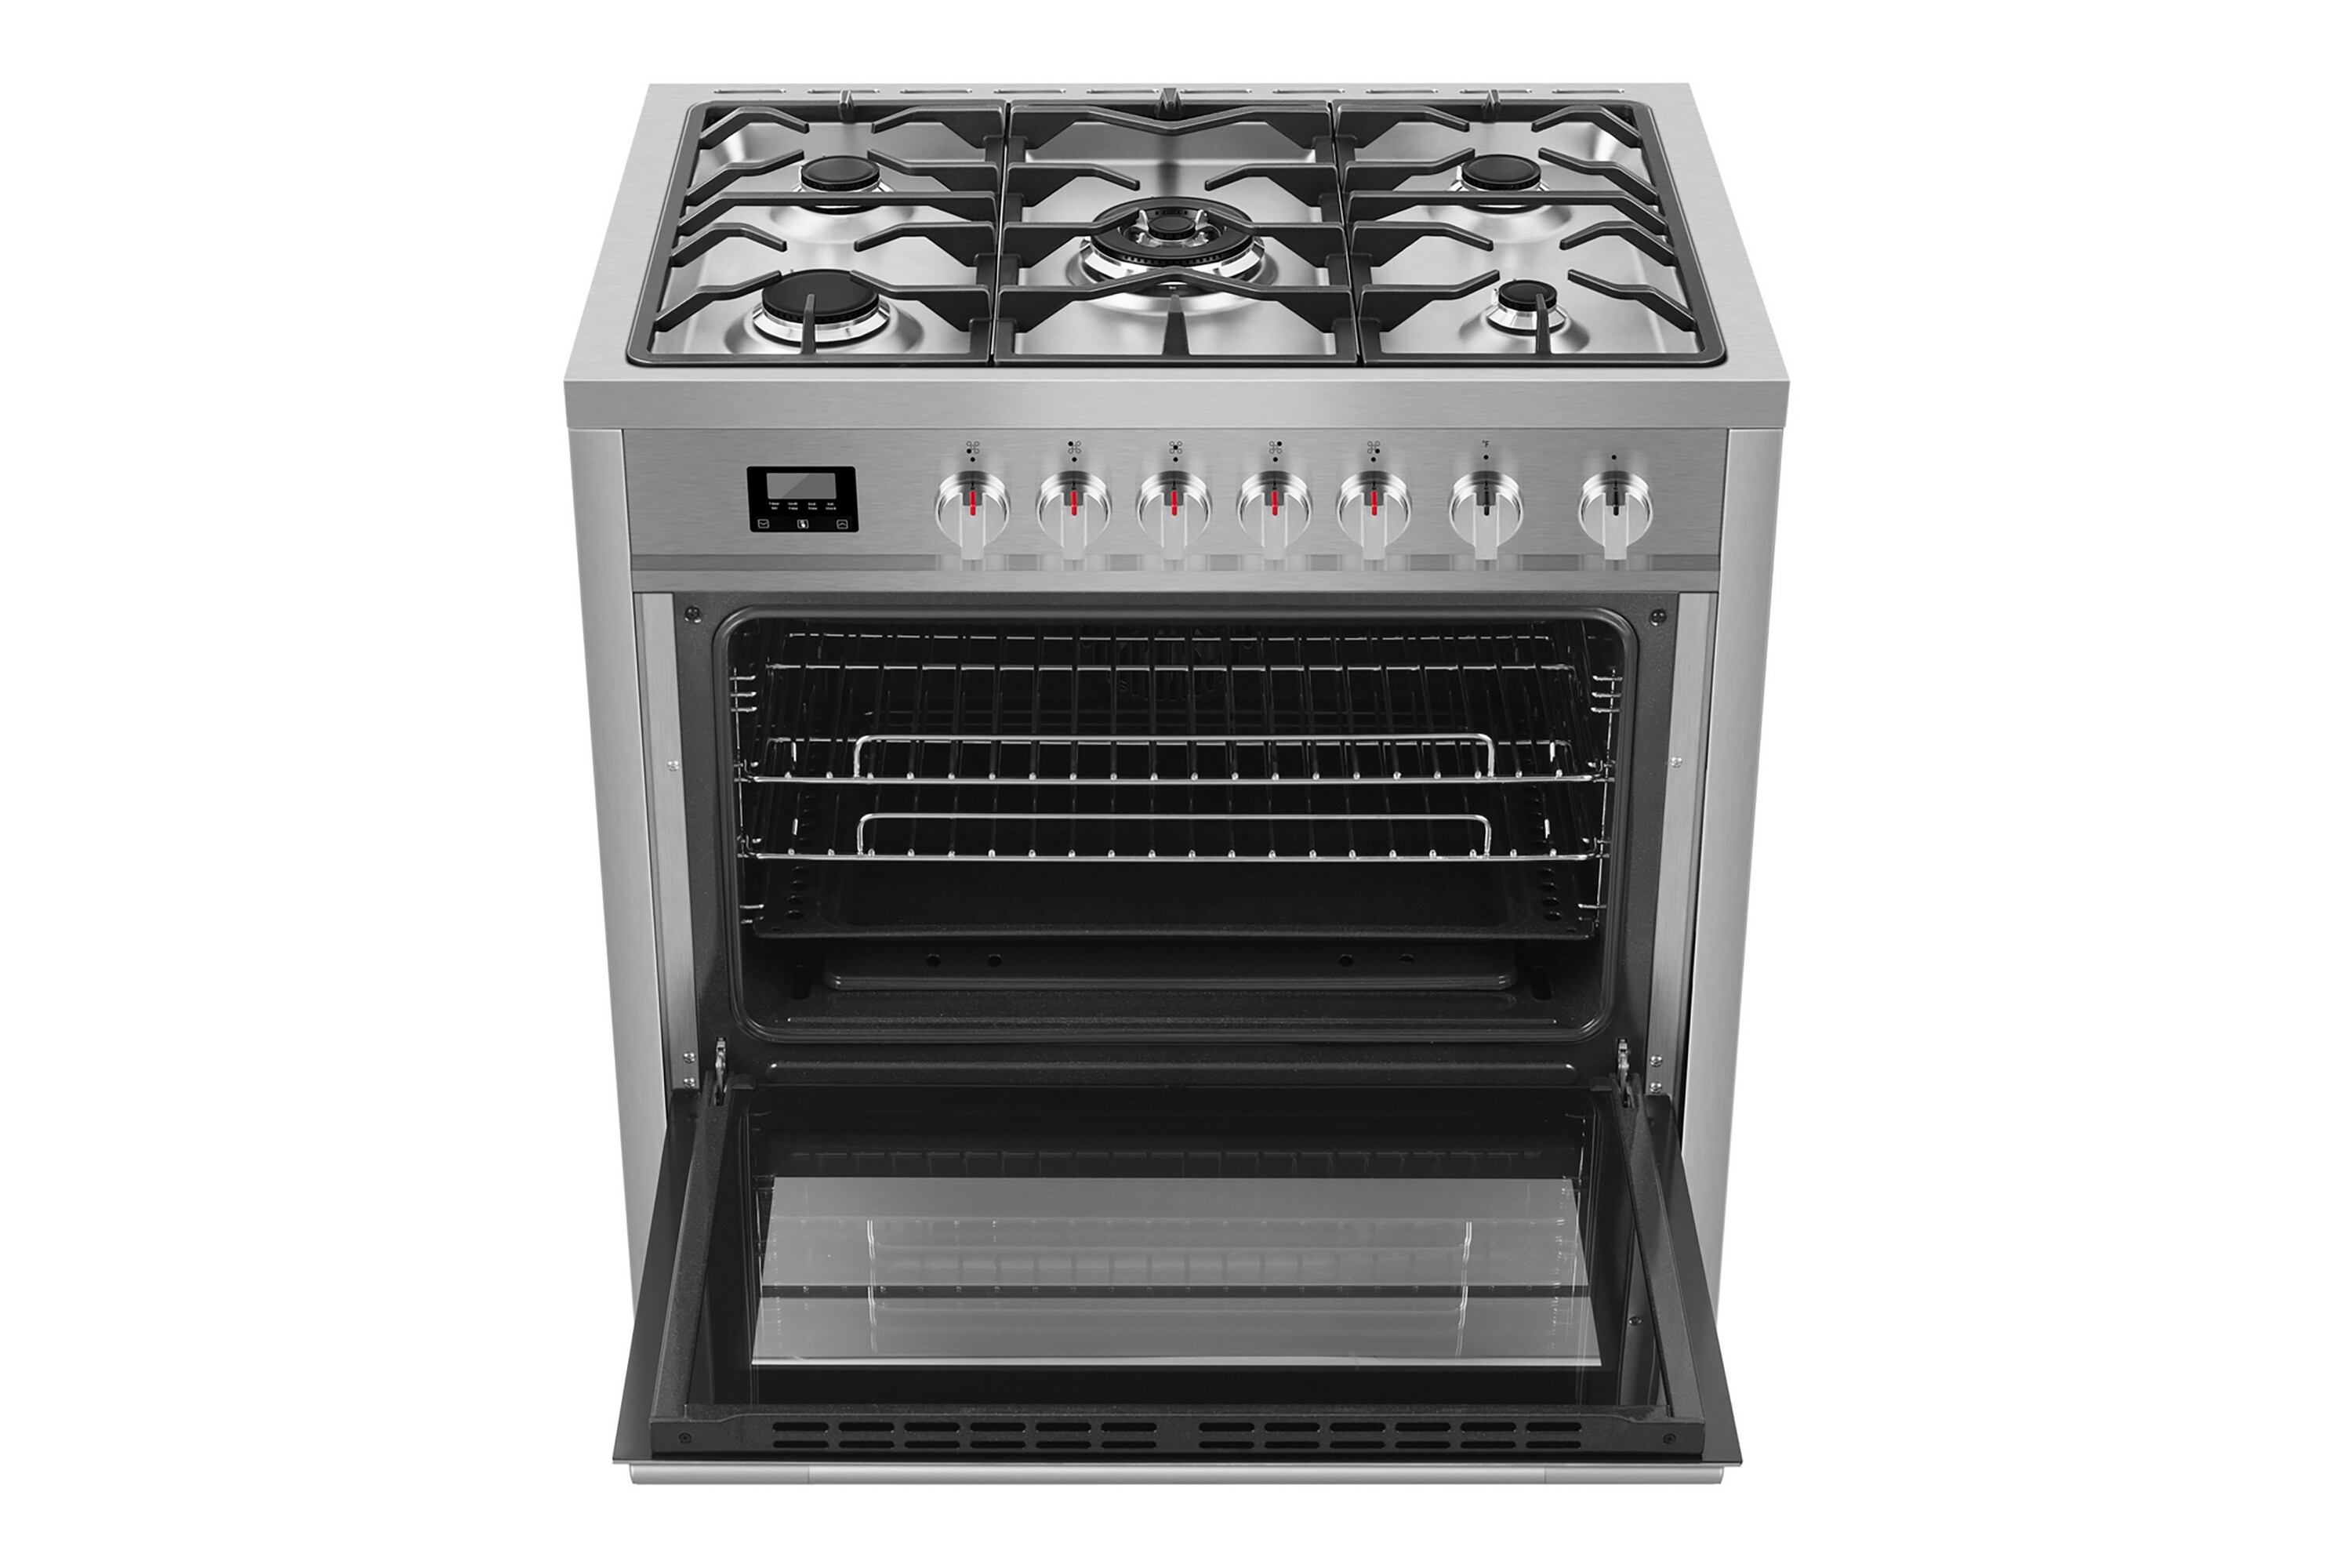 36 Inch Empava 36 Slide-In Freestanding Single Oven Ga with 5 Sealed Burner Cooktop in Stainless Steel